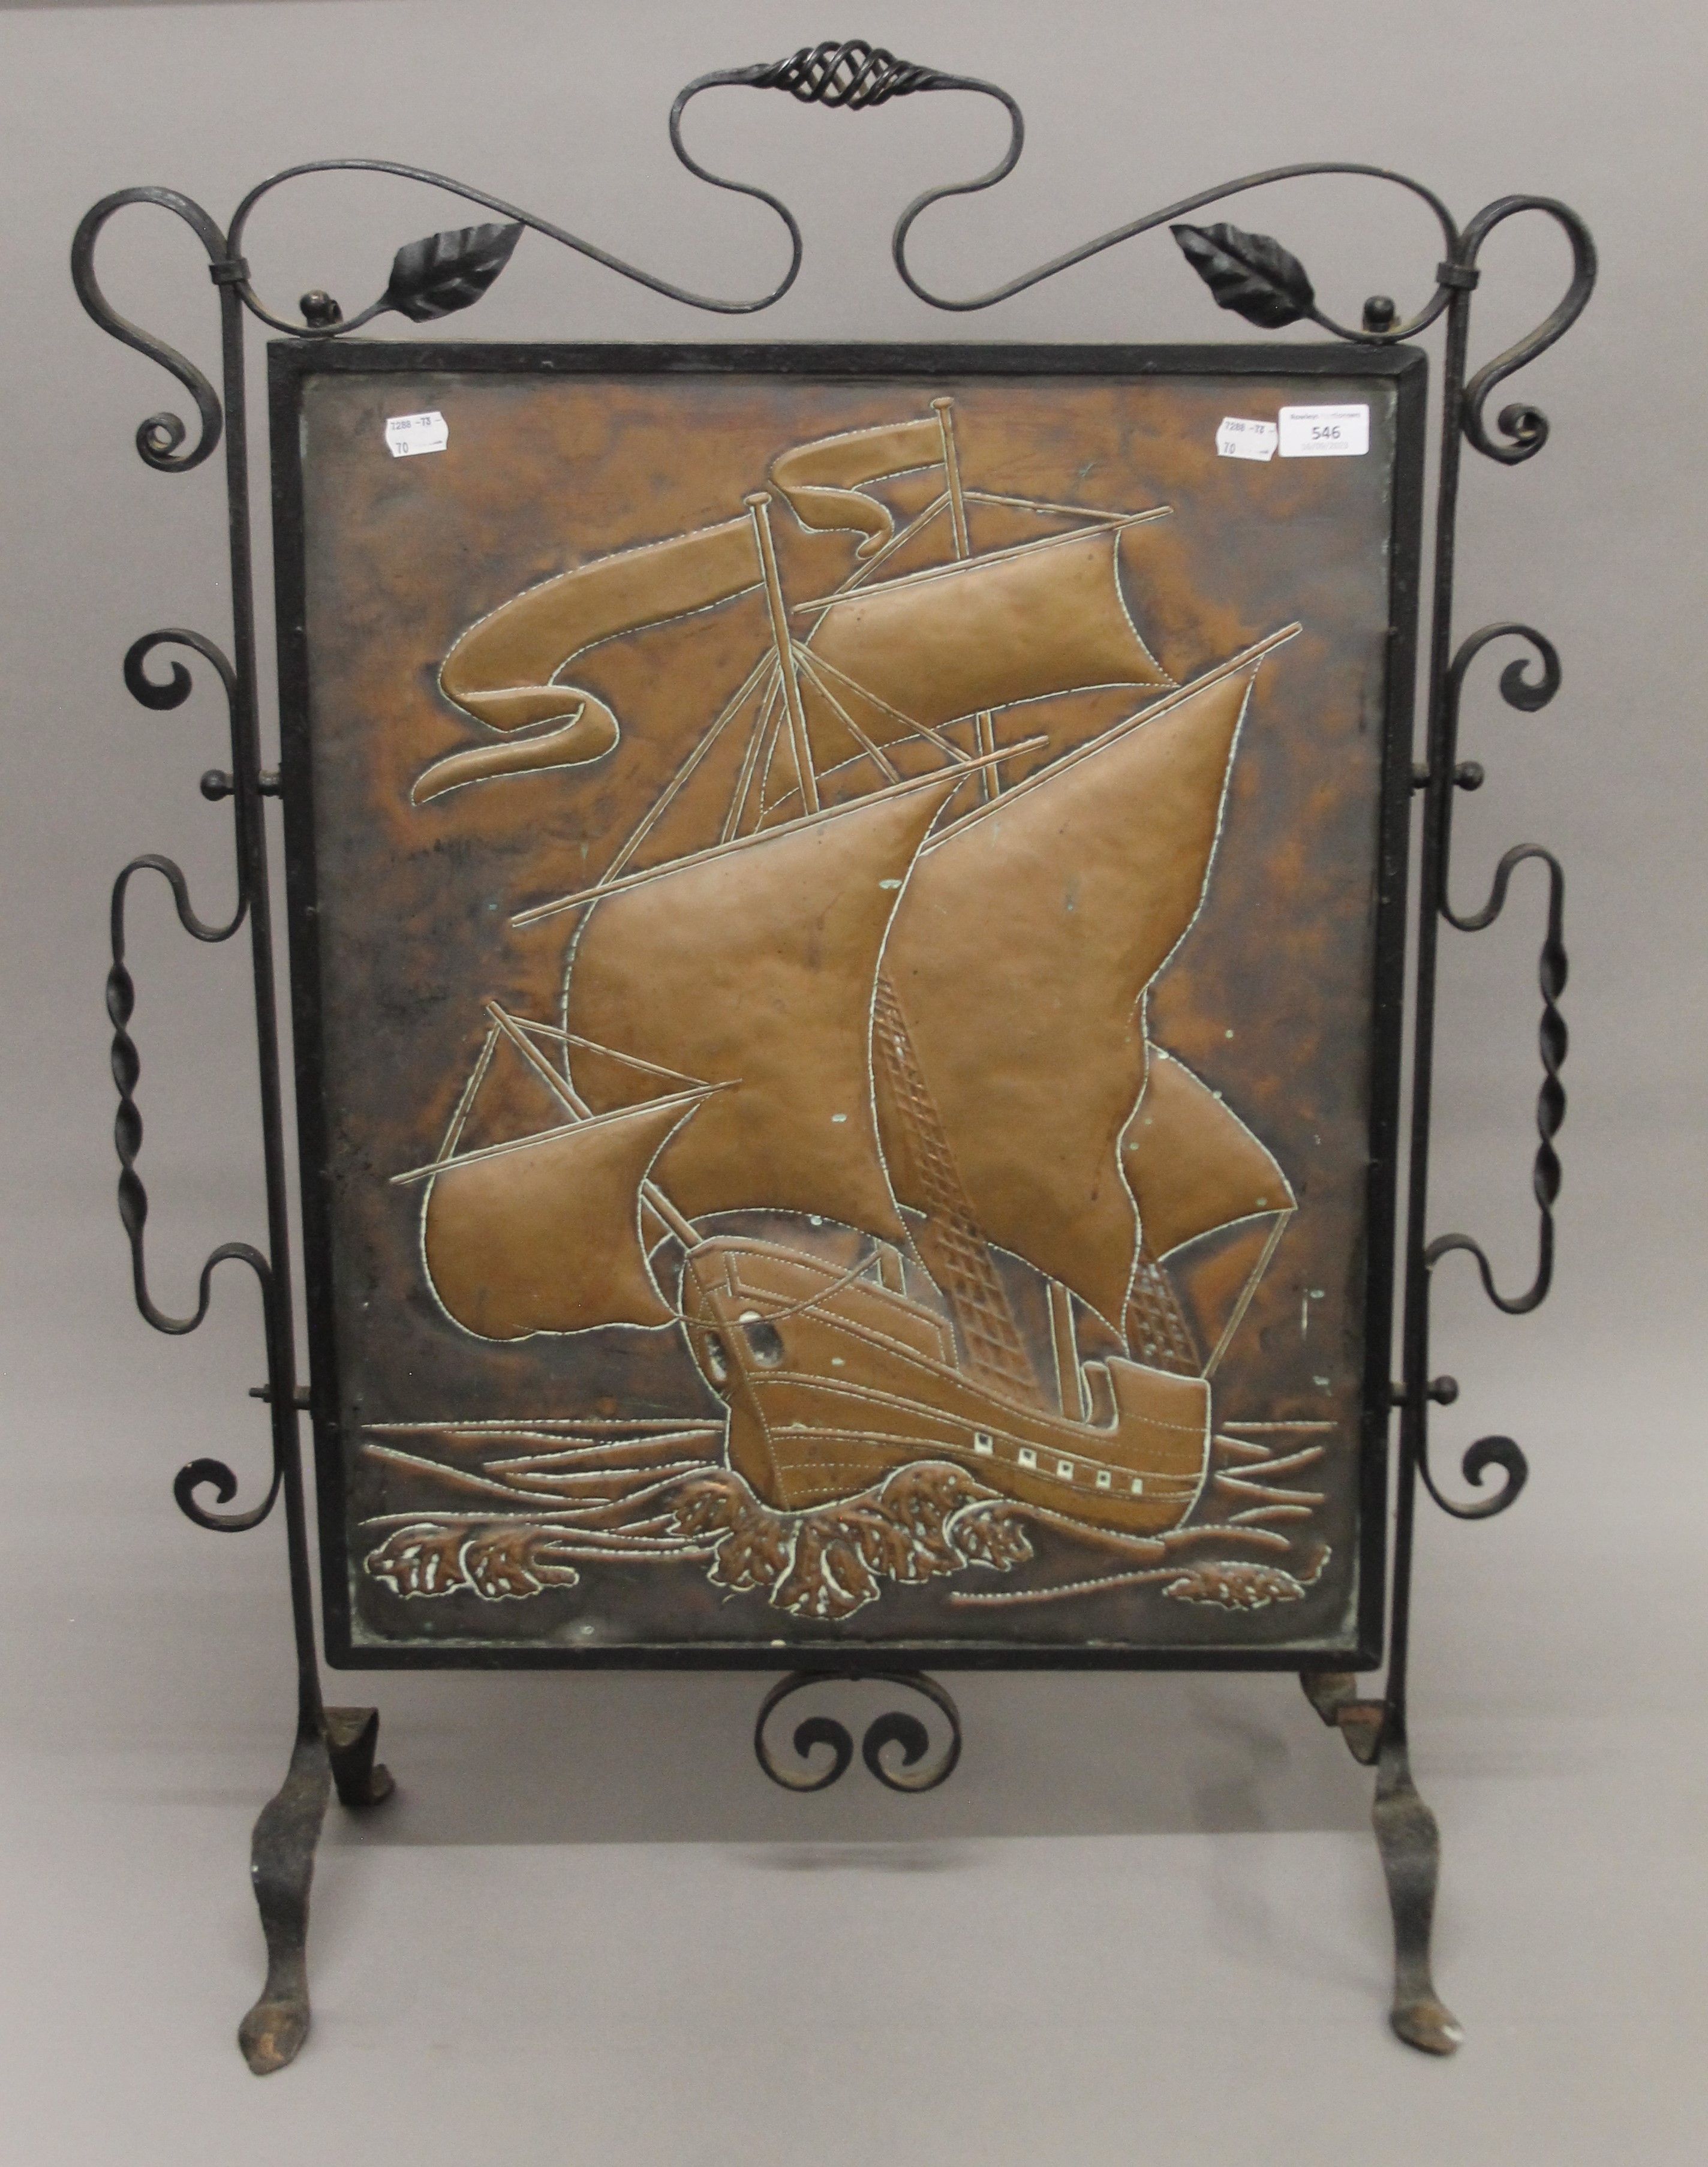 An Arts and Crafts copper and wrought iron fire screen depicting a galleon. 65 cm wide.